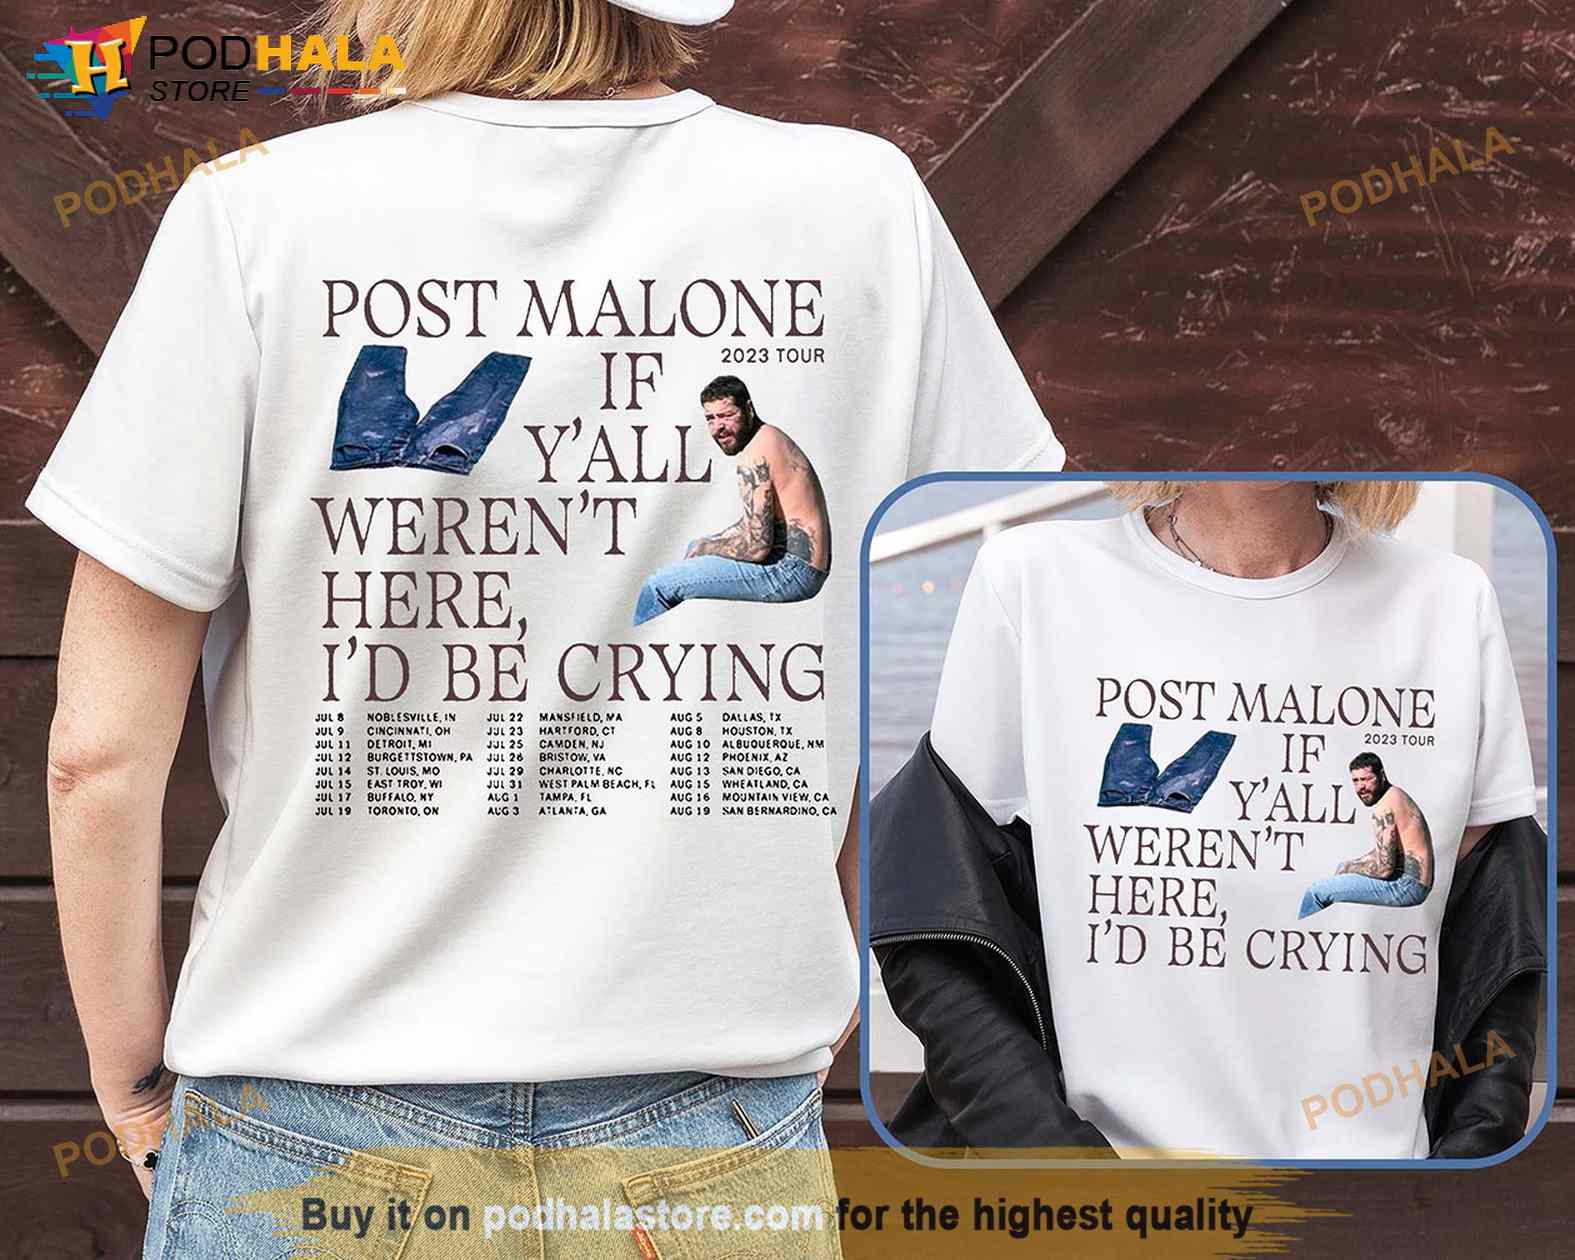 Post Malone 2023 Tour Unisex Shirt, If Y'all Weren't Here I'd Be Crying Tee